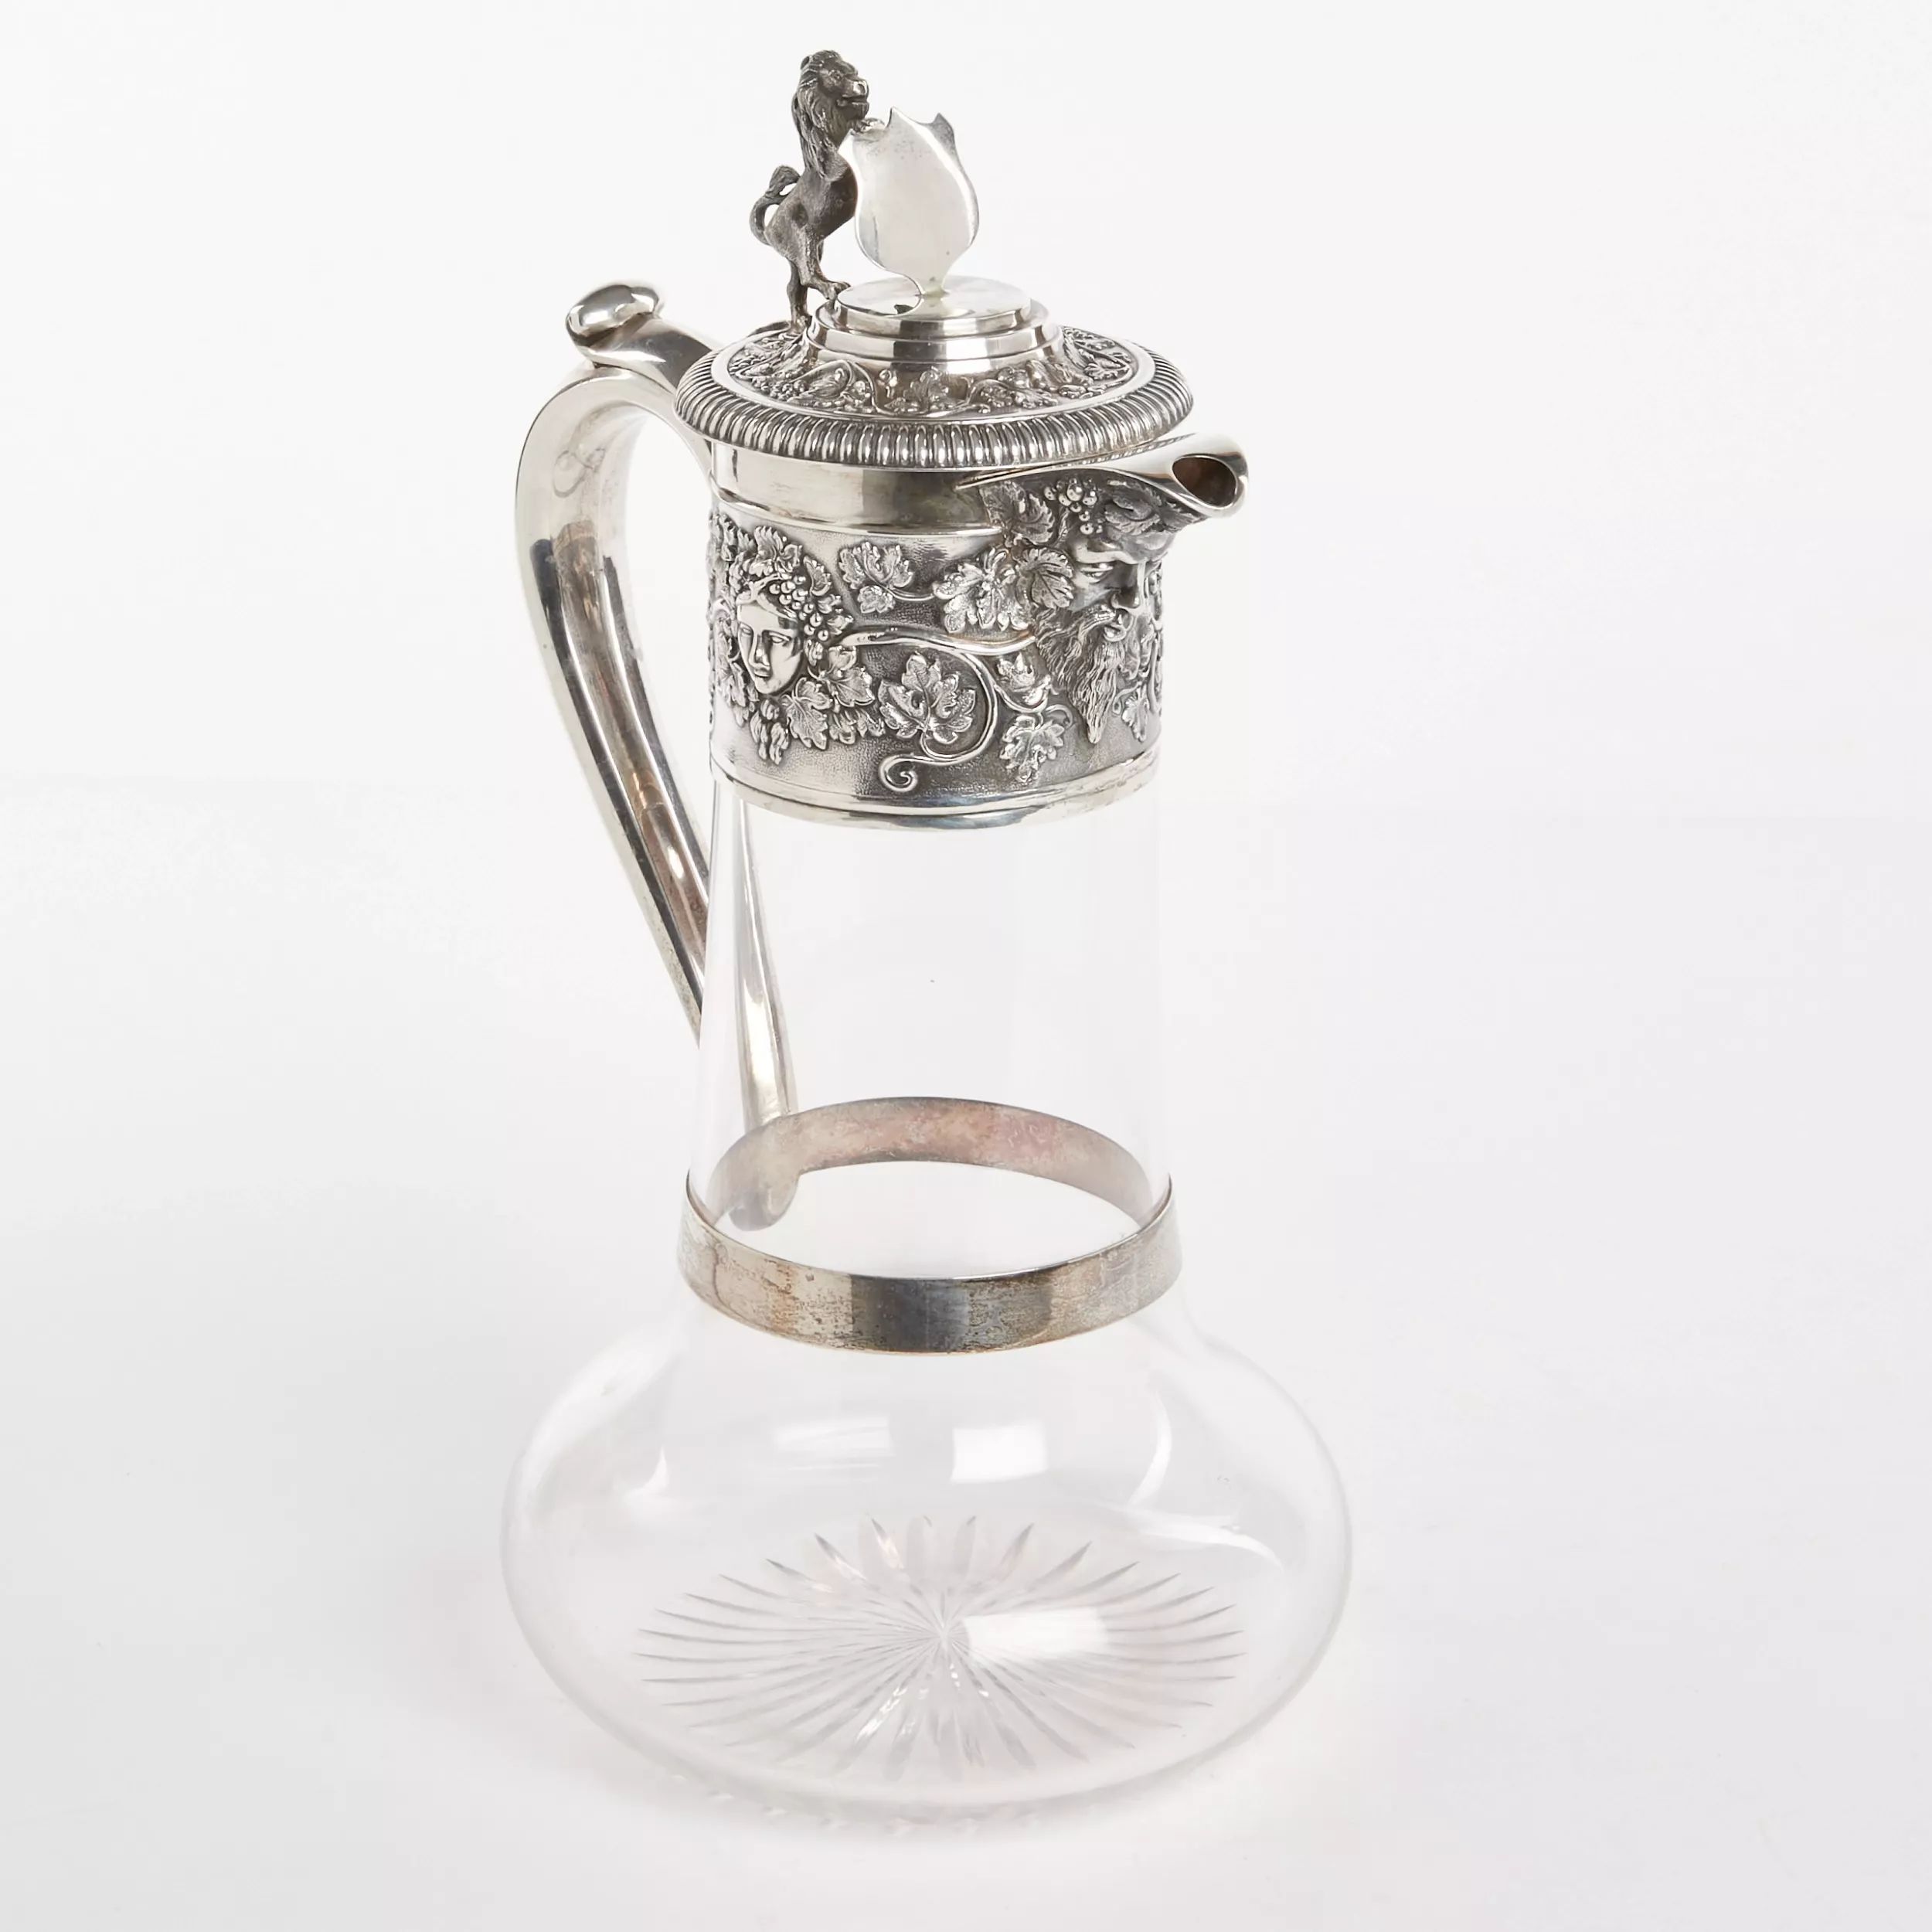 Silver-Wine-Jug-with-Glass-Horace-Woodward-&-Hugh-Taylor-London-1893-